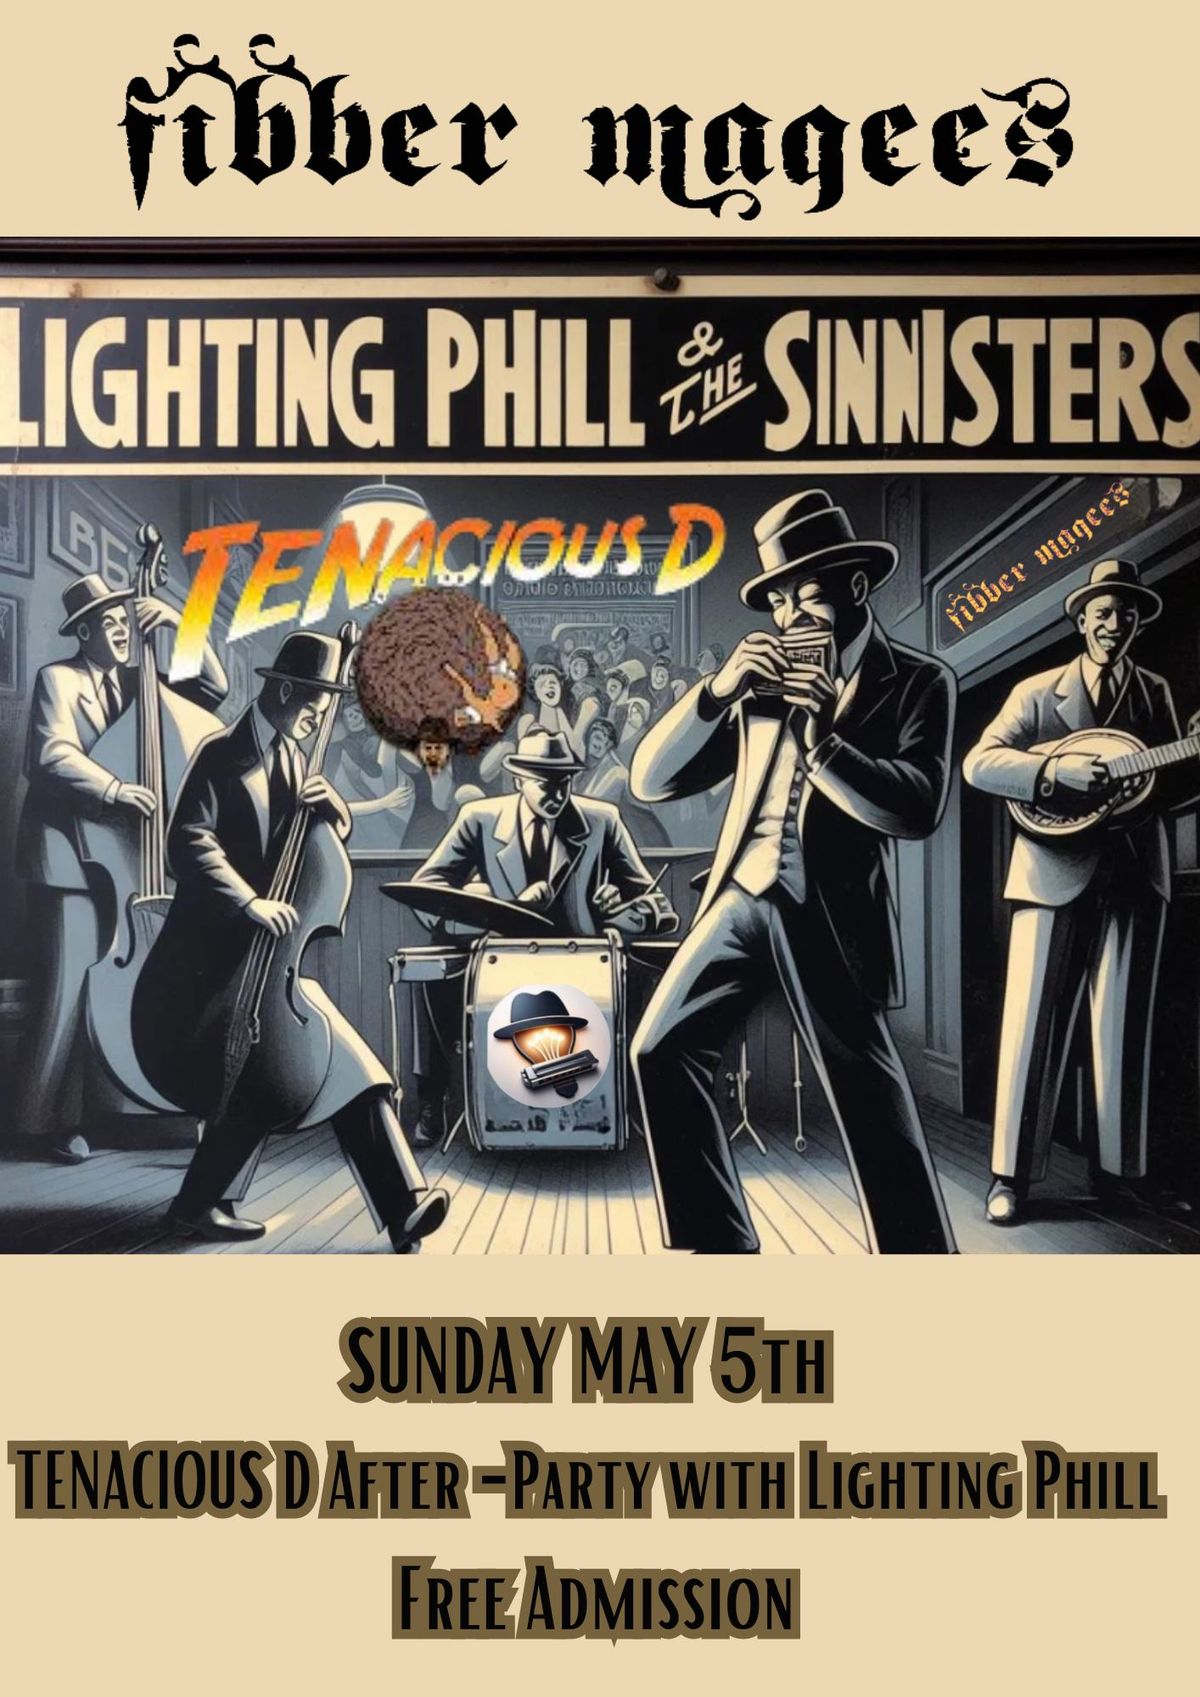 Tenacious D AFTER-PARTY with Lighting Phill - FREE ADMISSION 